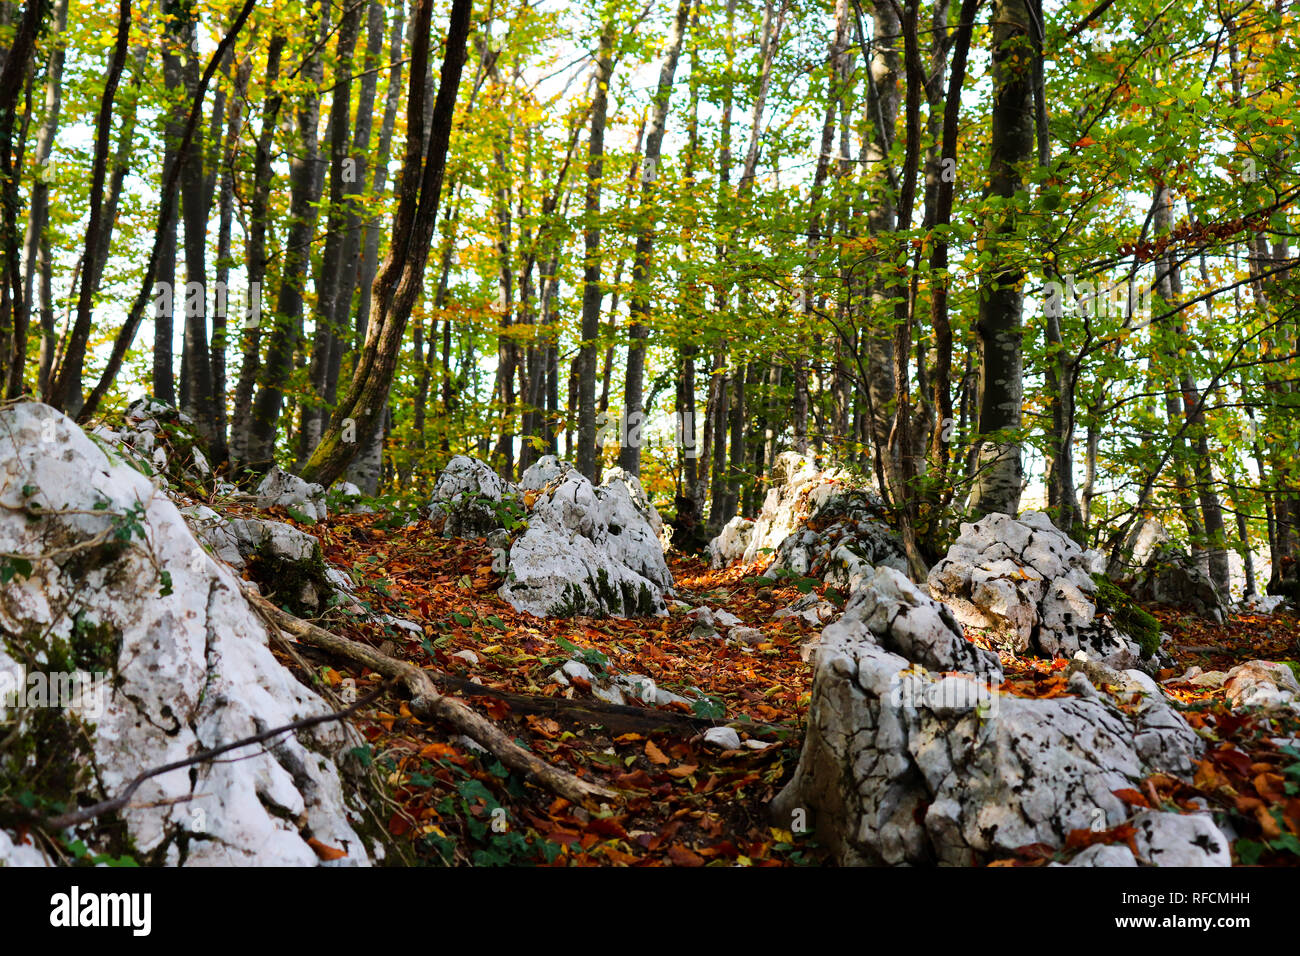 Shot of forest with rocky terrain, leaves, autumn almost starts. Last days of summer. Sunny forest shot. Stock Photo